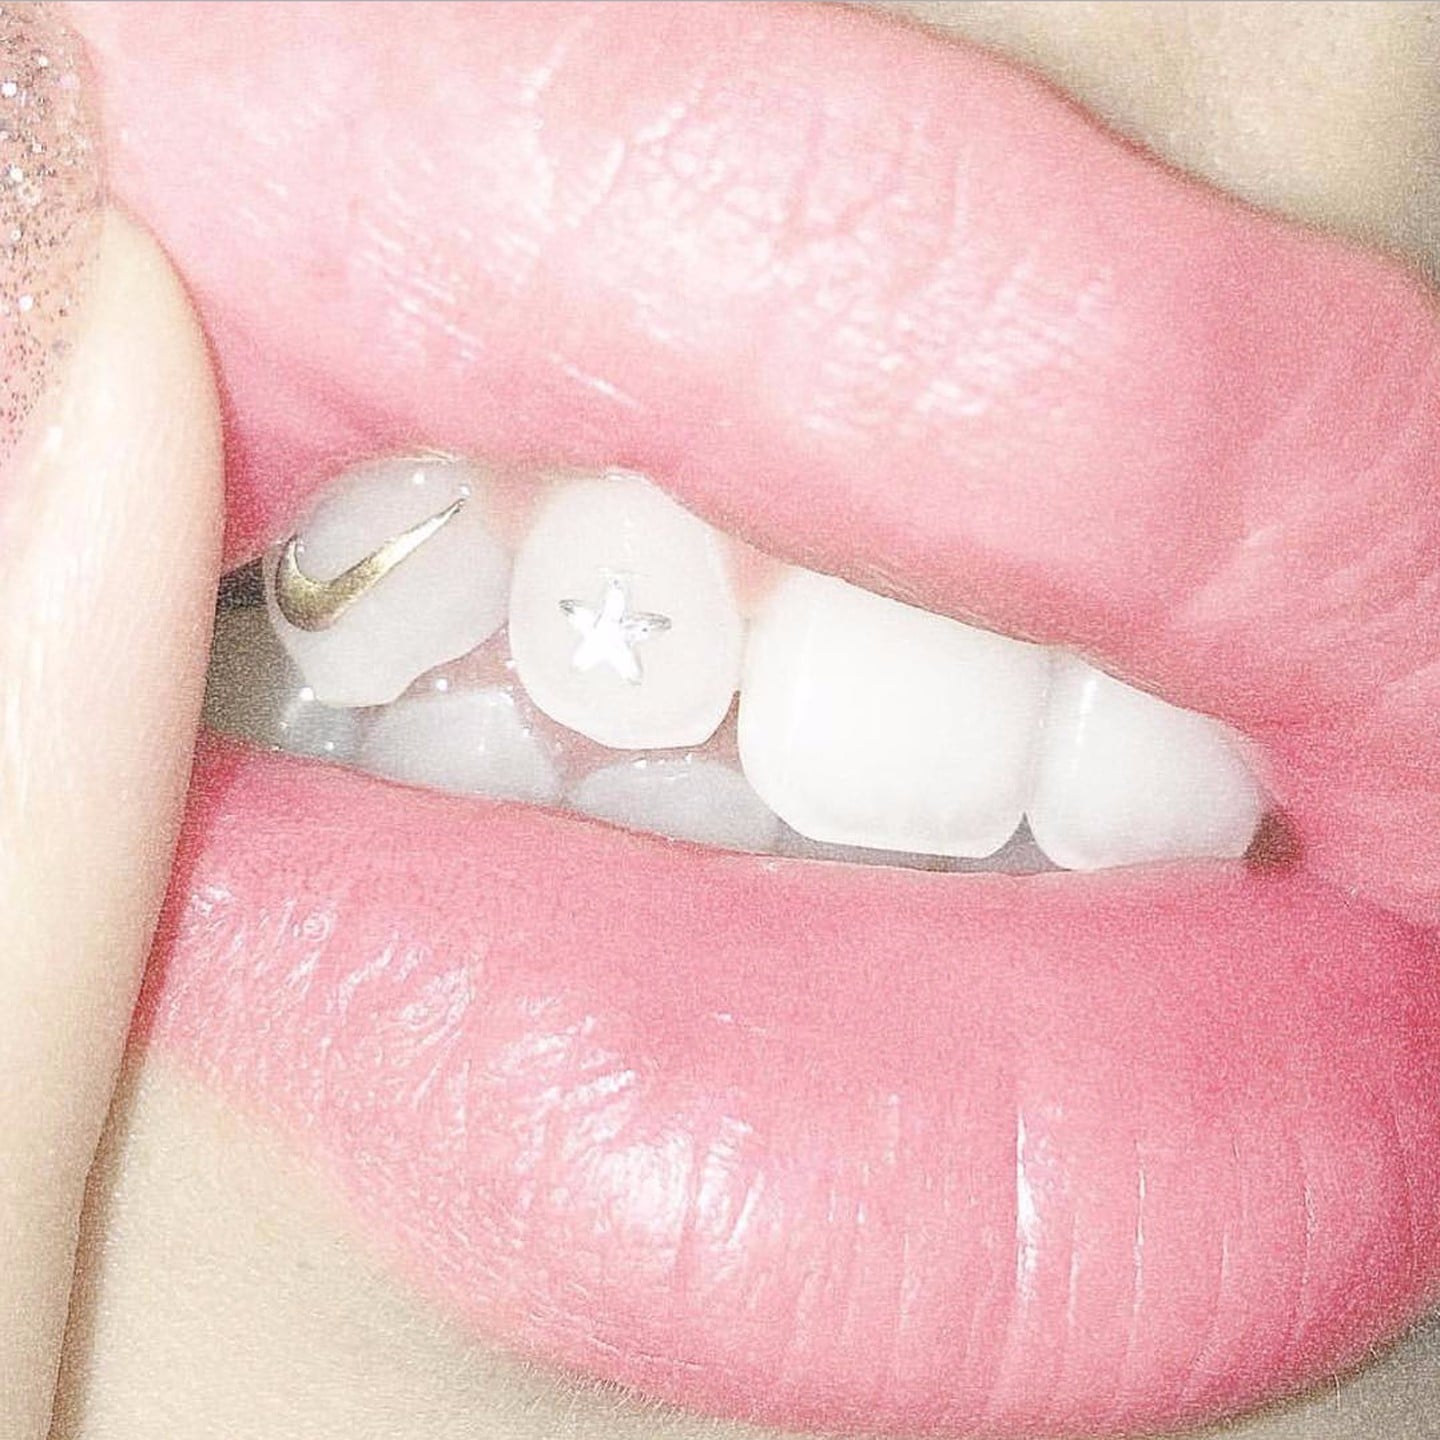 Tooth gems are making a comeback, so could this be the most painful - and  dangerous - beauty trend ever?